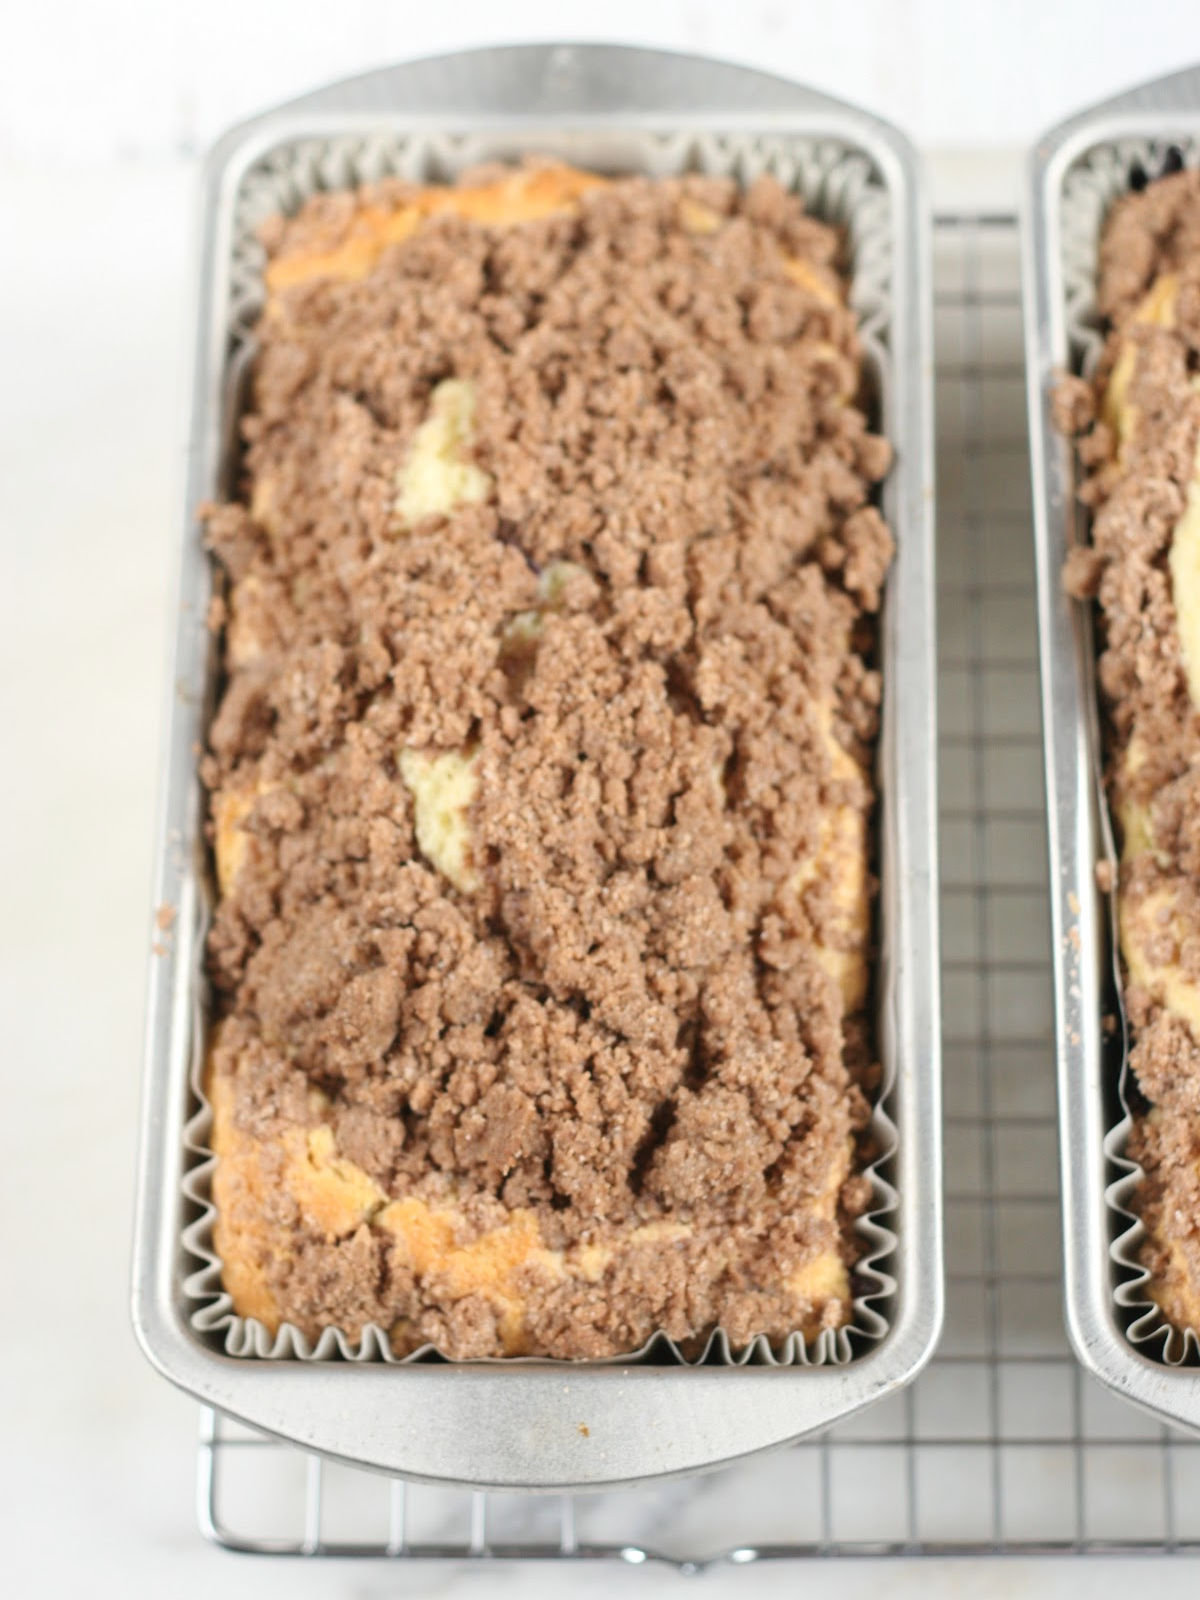 Coffee cake with streusel topping in metal loaf pans on metal baking rack.